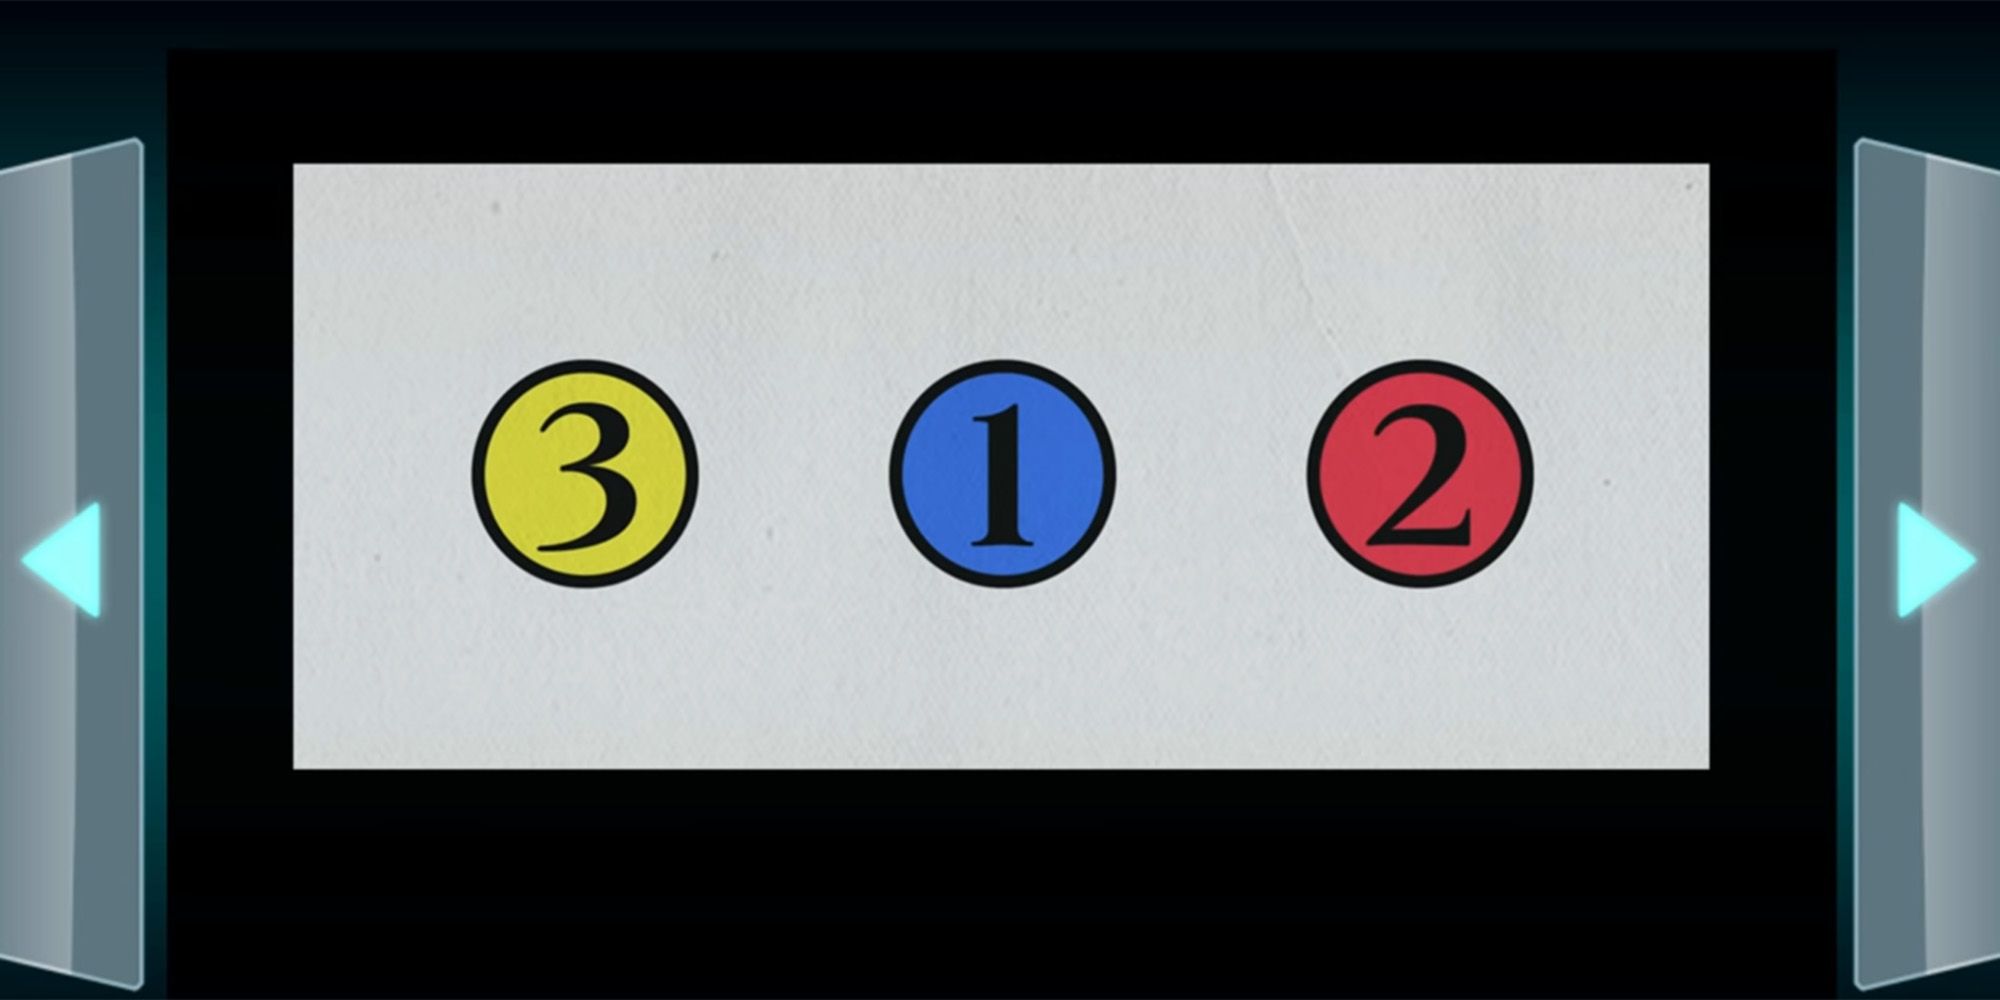 infirmary colored note displaying yellow three, blue one, and red two